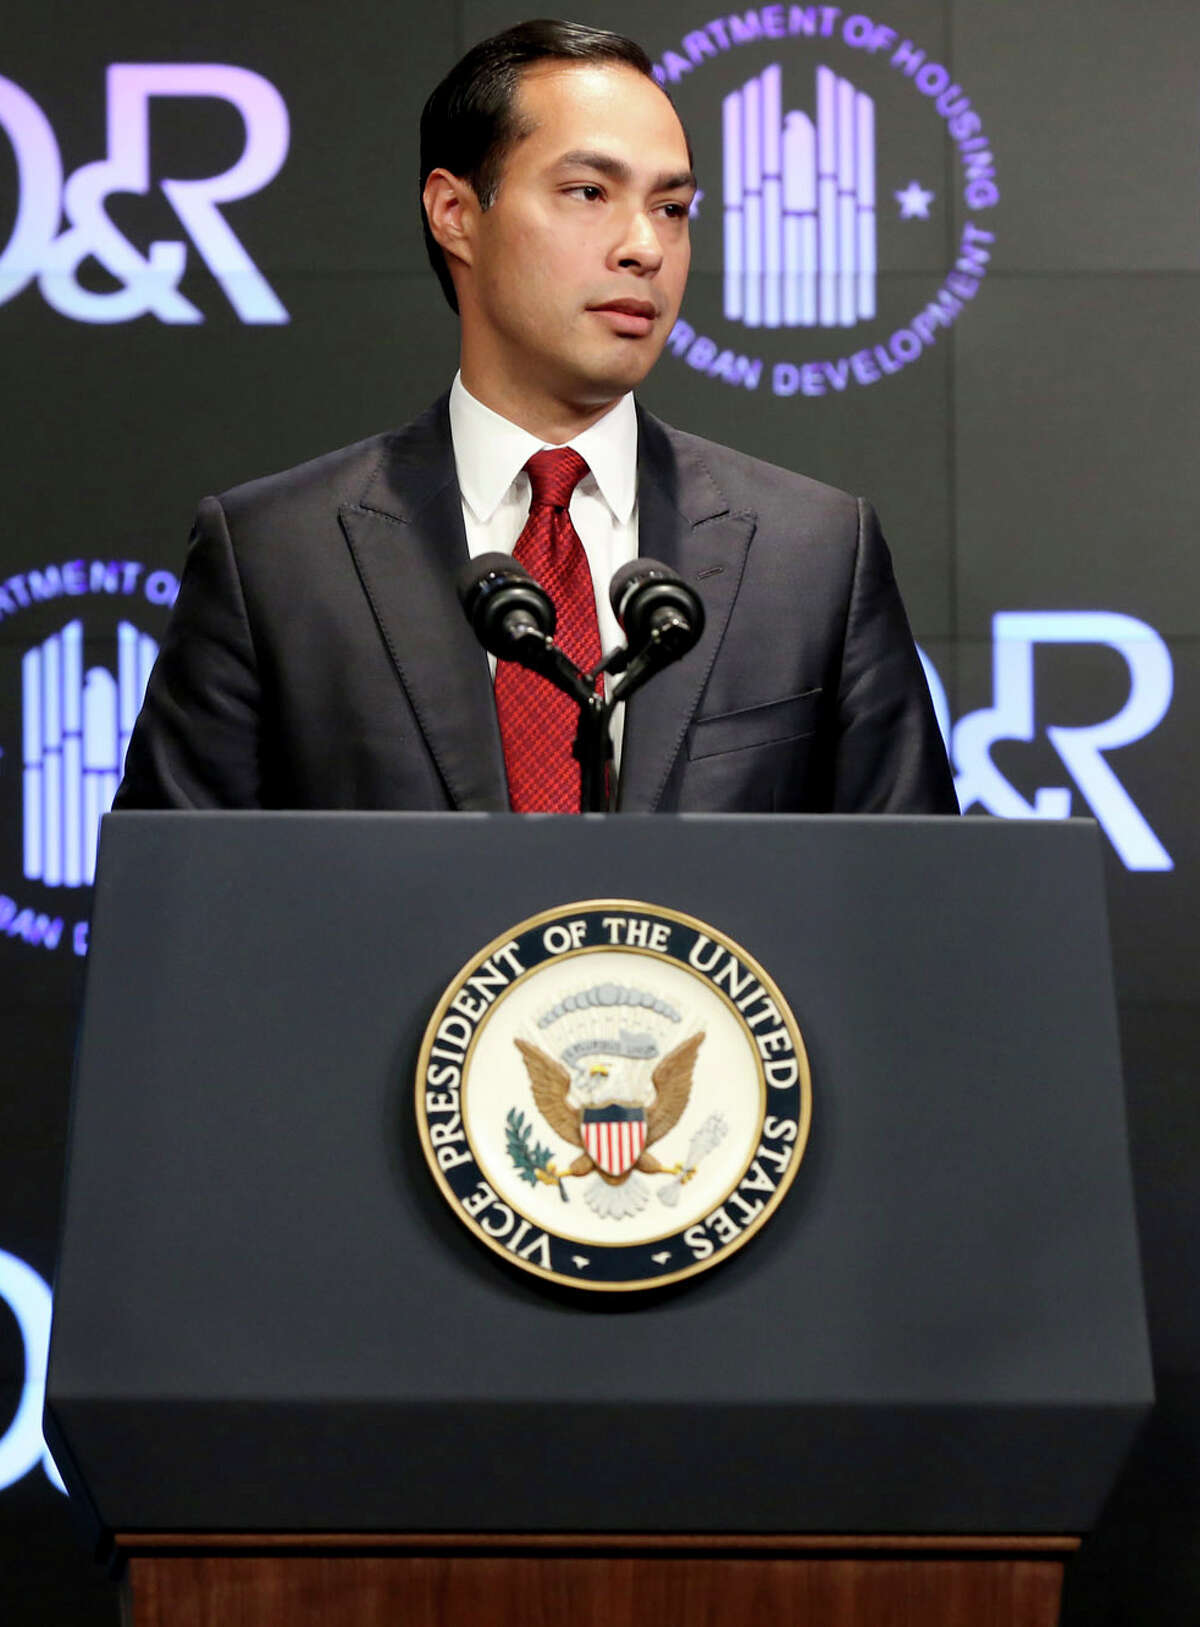 The U.S. Department of Housing and Urban Development announced Thursday it is giving a $2.7 million grant to the San Antonio Housing Authority to expand a job training program at SAHA’s Cassiano Homes, a public housing complex. Former San Antonio mayor Julian Castro is now HUD secretary.